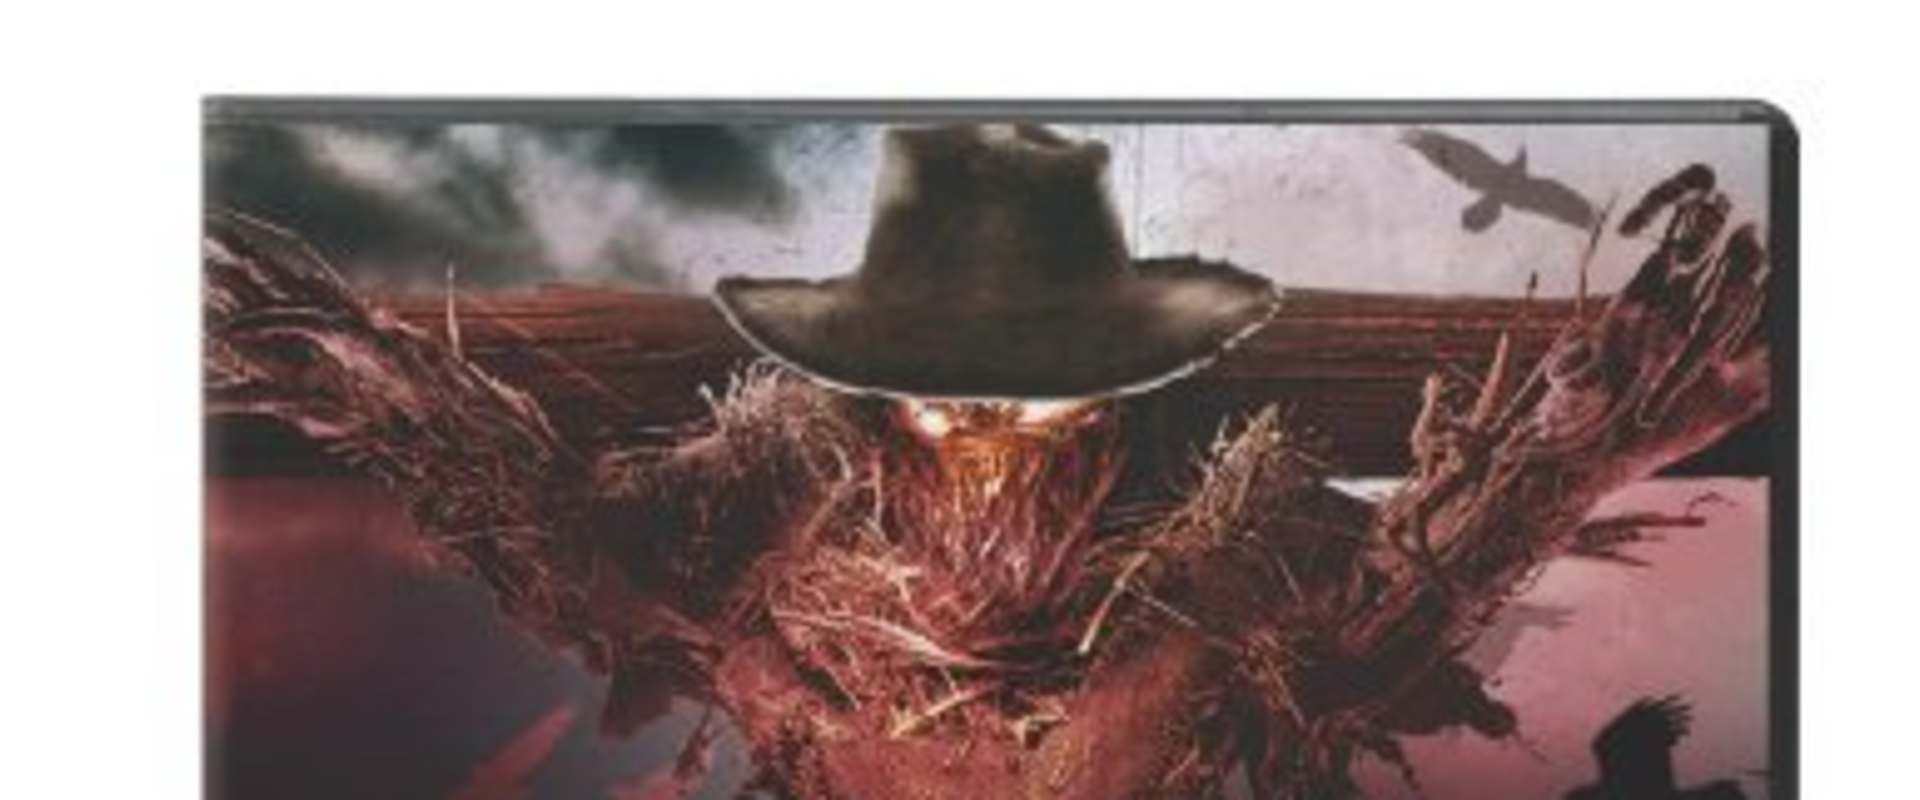 Messengers 2: The Scarecrow background 1